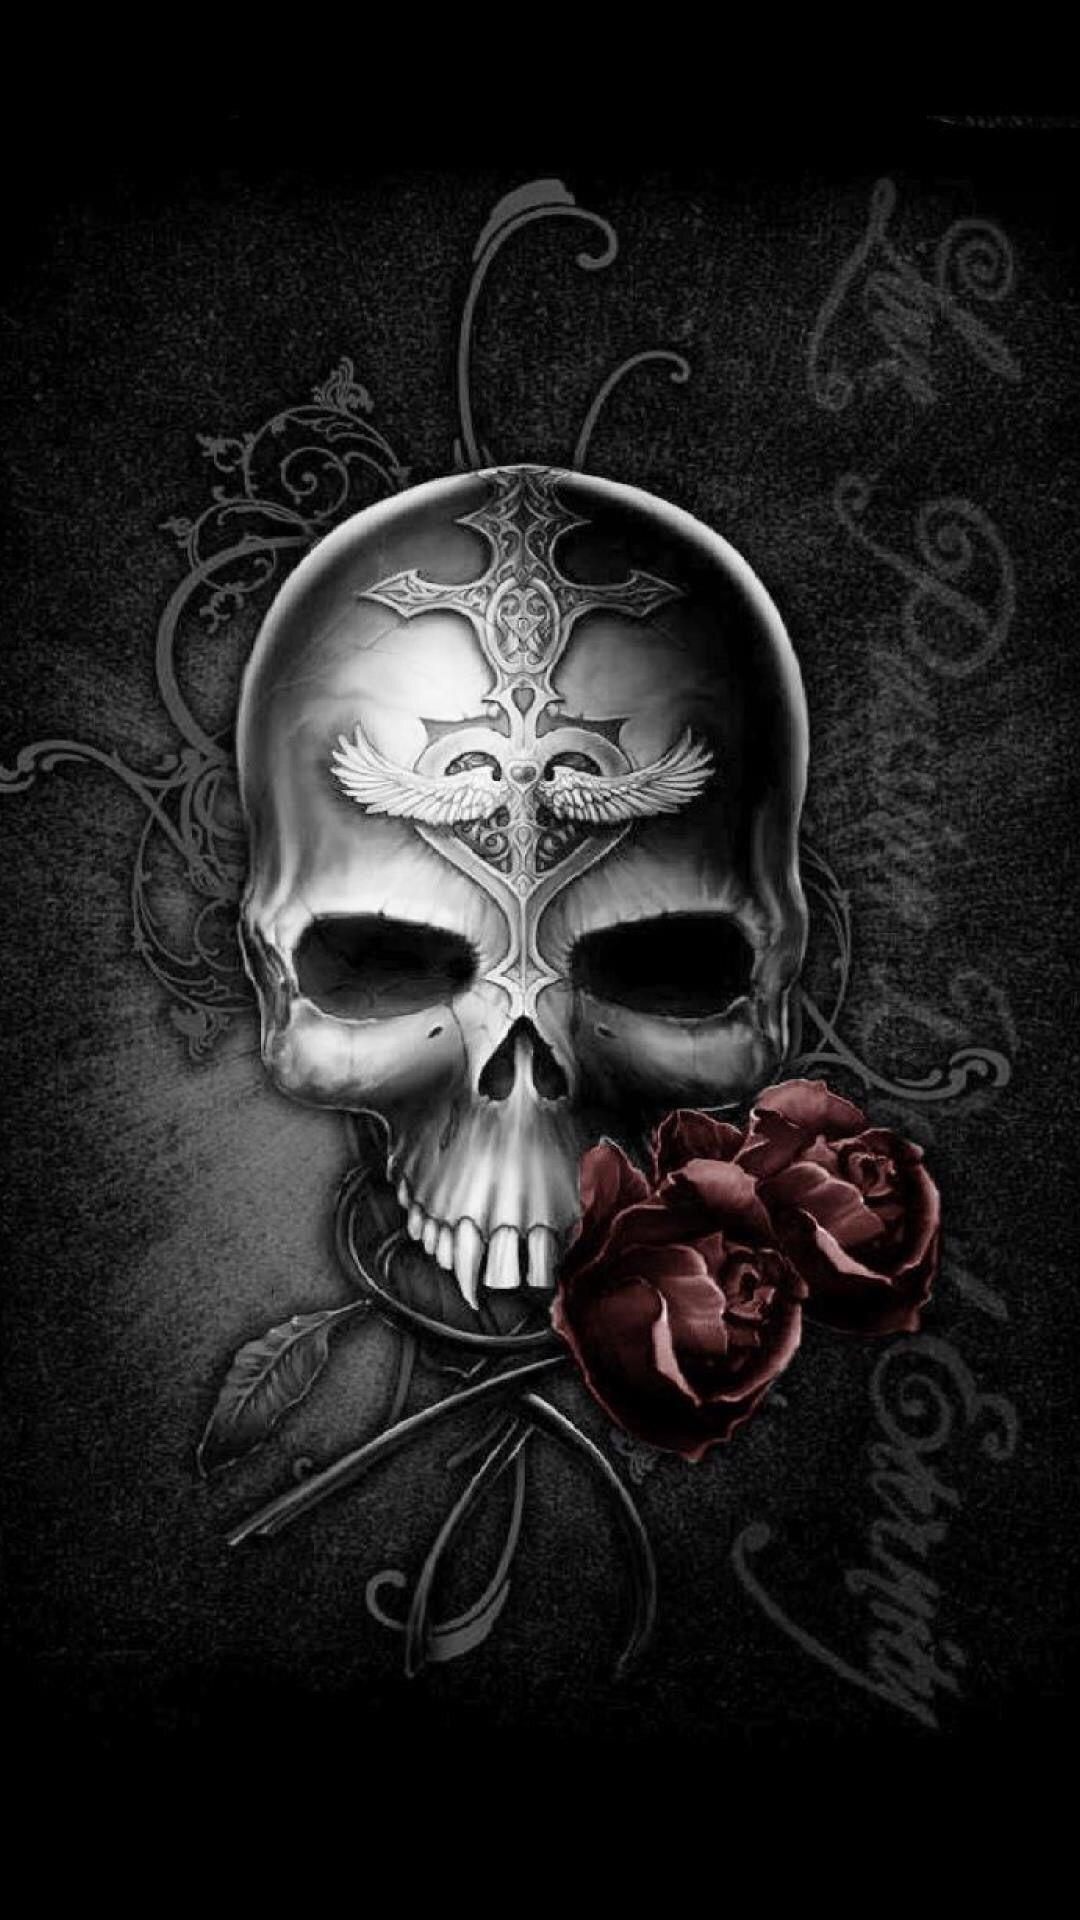 Badass Wallpaper For Android 05 0f 40 Grim Reaper Flame Skull. HD